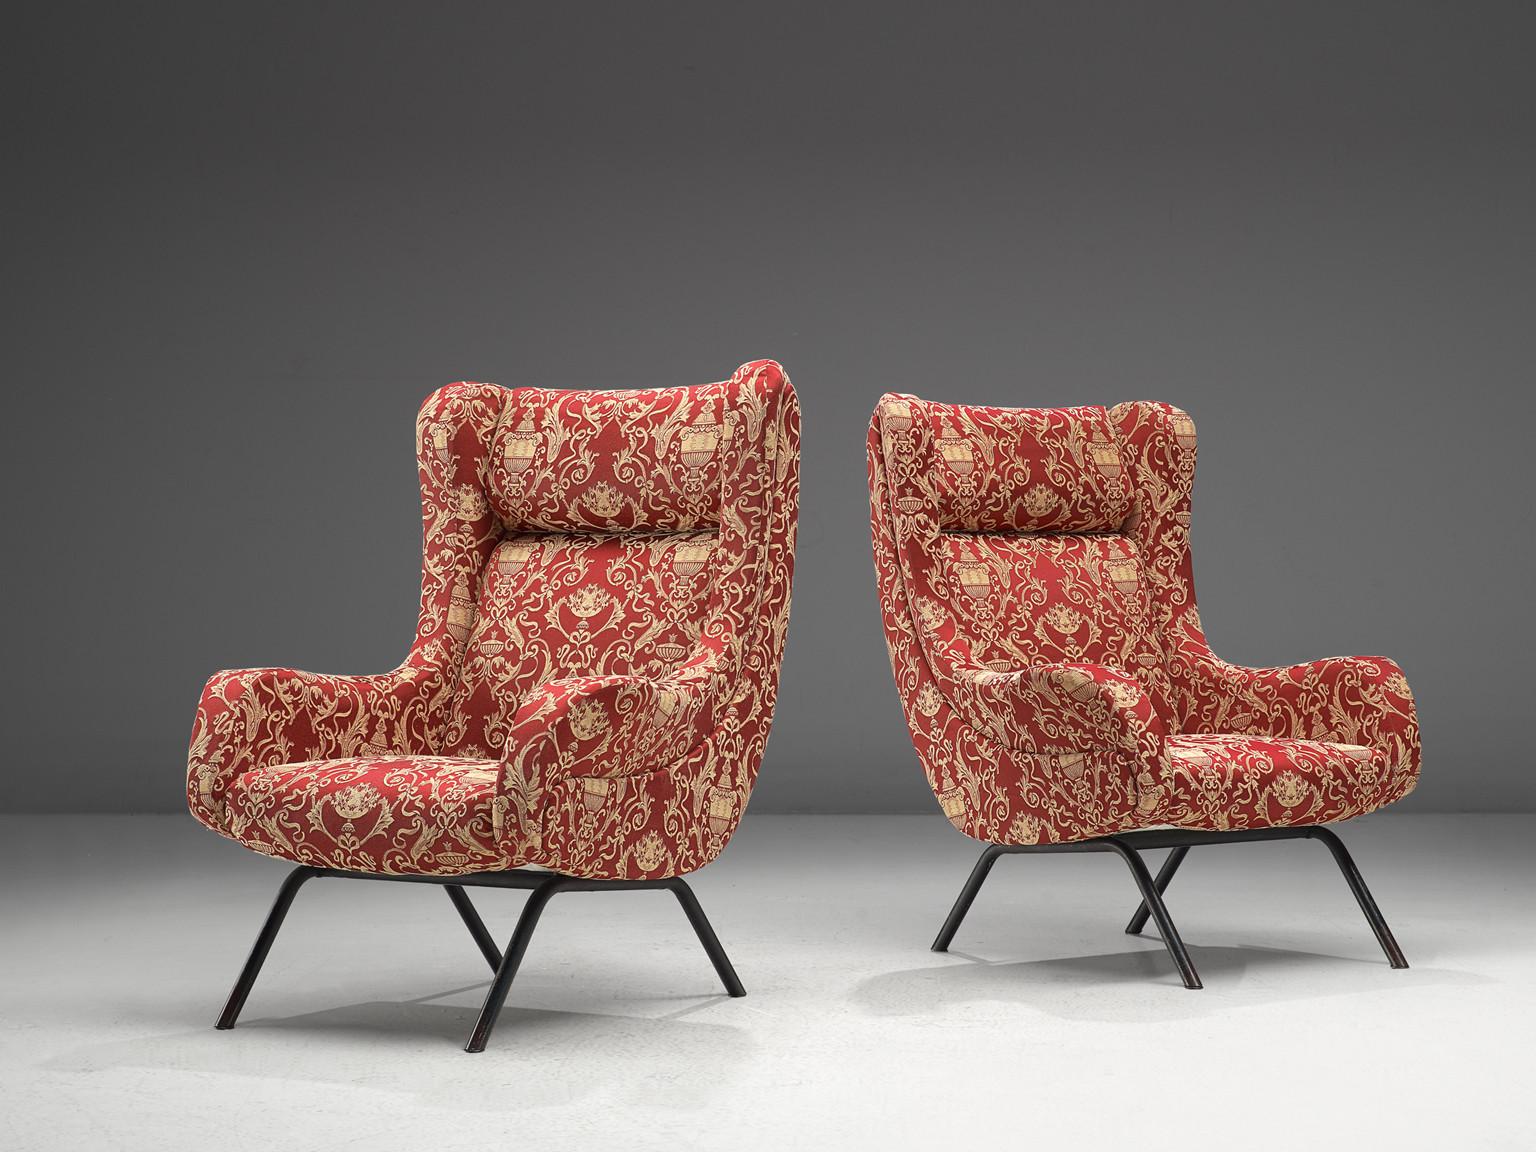 Pair of easy chairs, fabric, coated steel, Italy, 1960s

These Italian easy chairs have a streamlined construction with elegant, subtle lines. When experienced from the side, a gentle curve is observable that forms the backrest and armrest. The seat